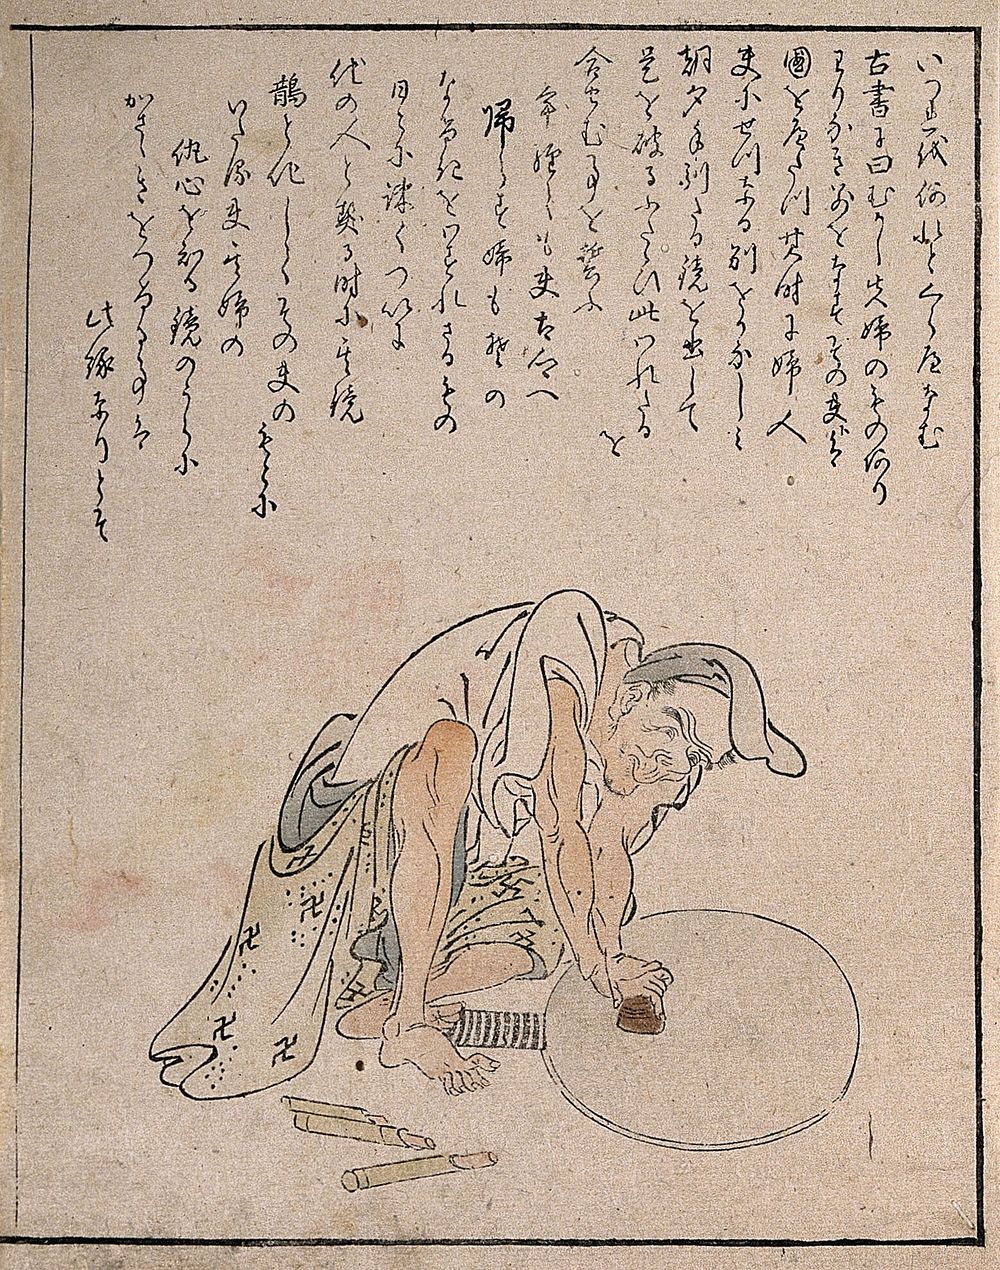 A mirror polisher at his work. Coloured woodcut by Minkō.